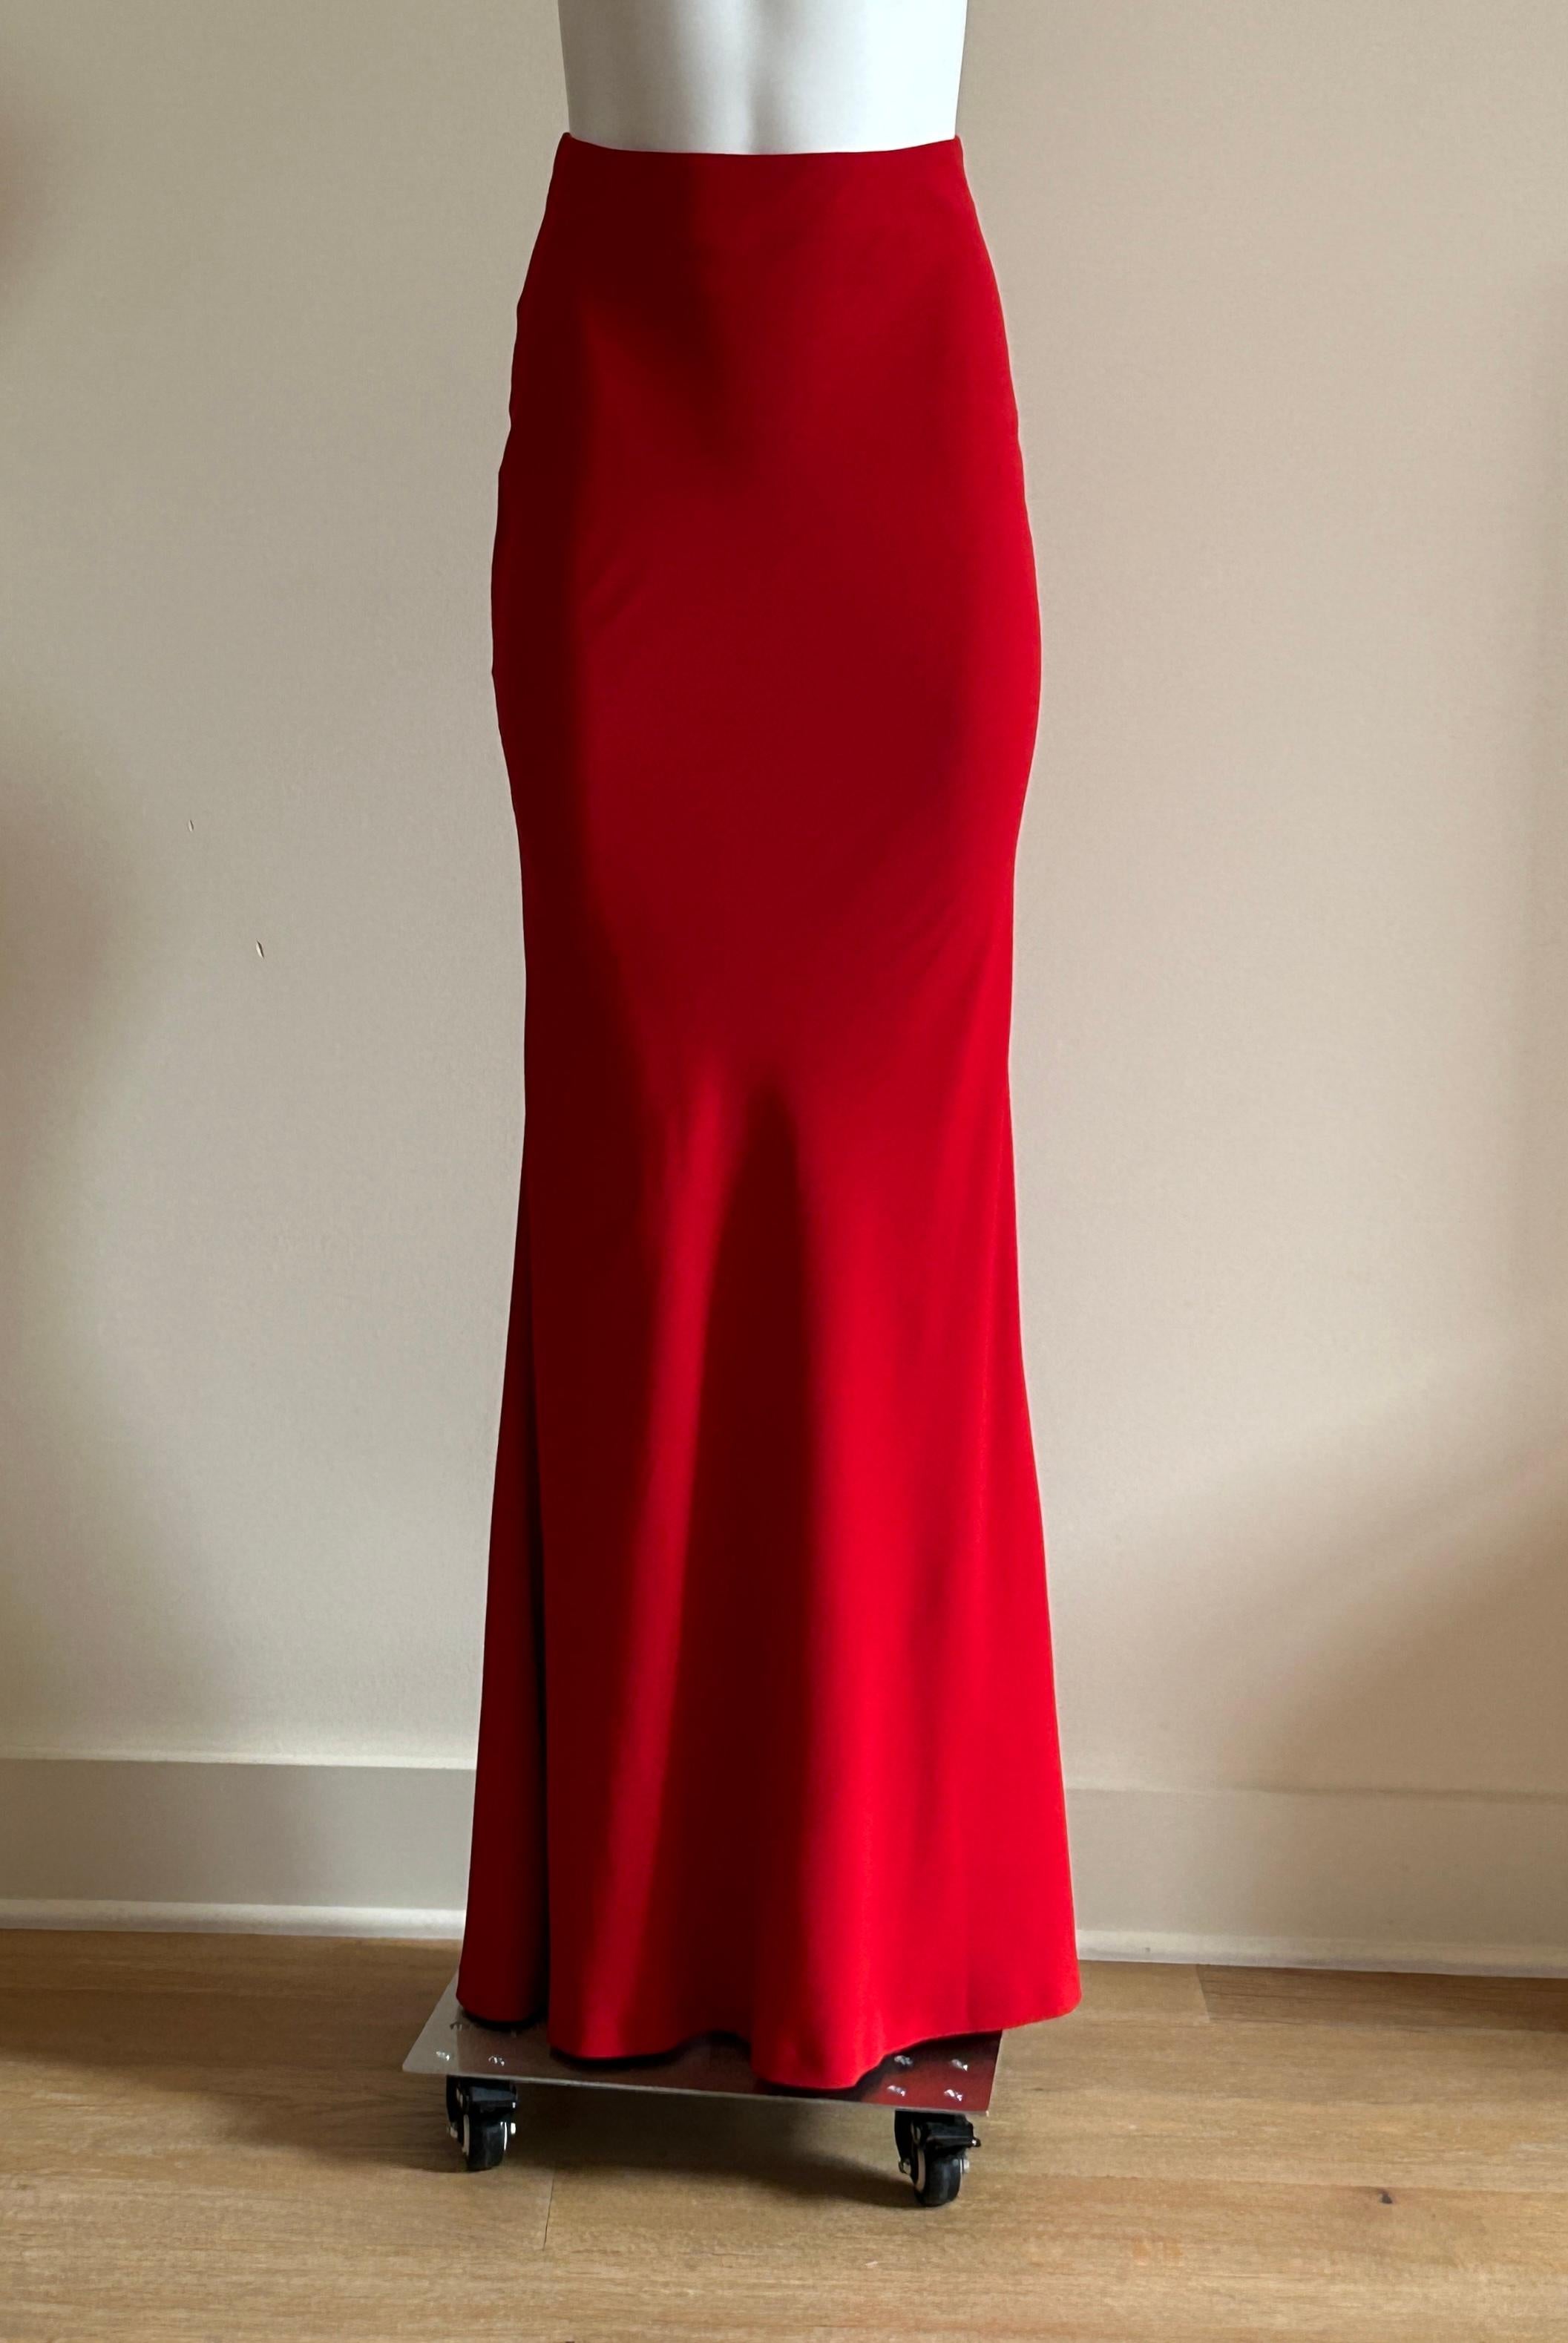 Alexander McQueen red full length maxi skirt with slight train in synthetic crepe. Back zip and hook and eye. Circa 2015 by Sarah Burton.

50% acetate, 50% viscose.
Fully lined in 100% silk.

Made in Italy.

Size IT 38, approximate US 2.
Waist